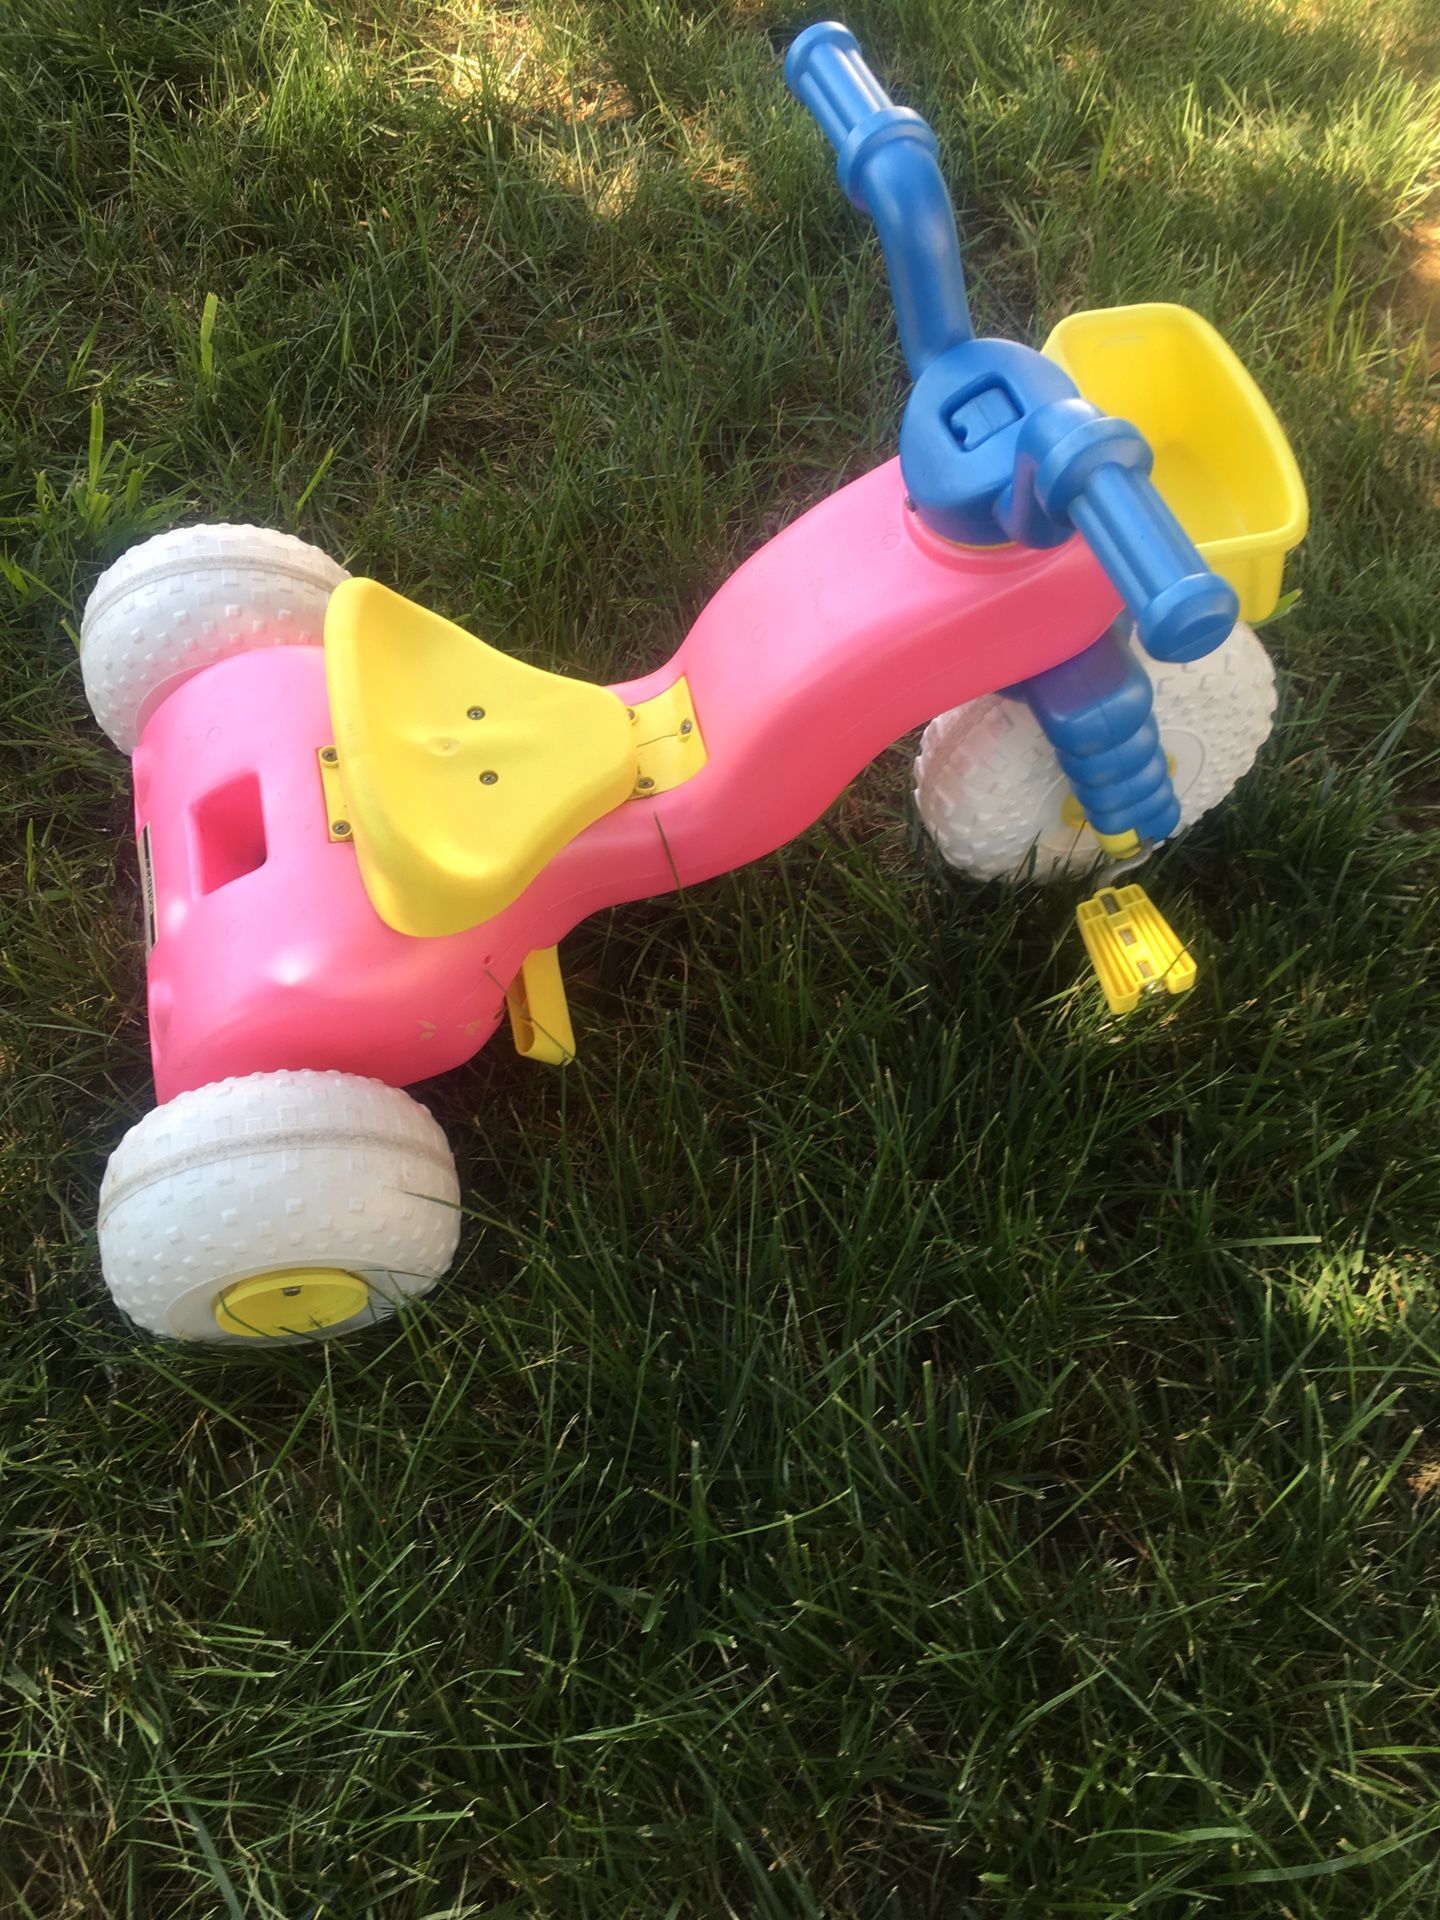 Little kids ride on toy with a push handle. Handle is not photographed .